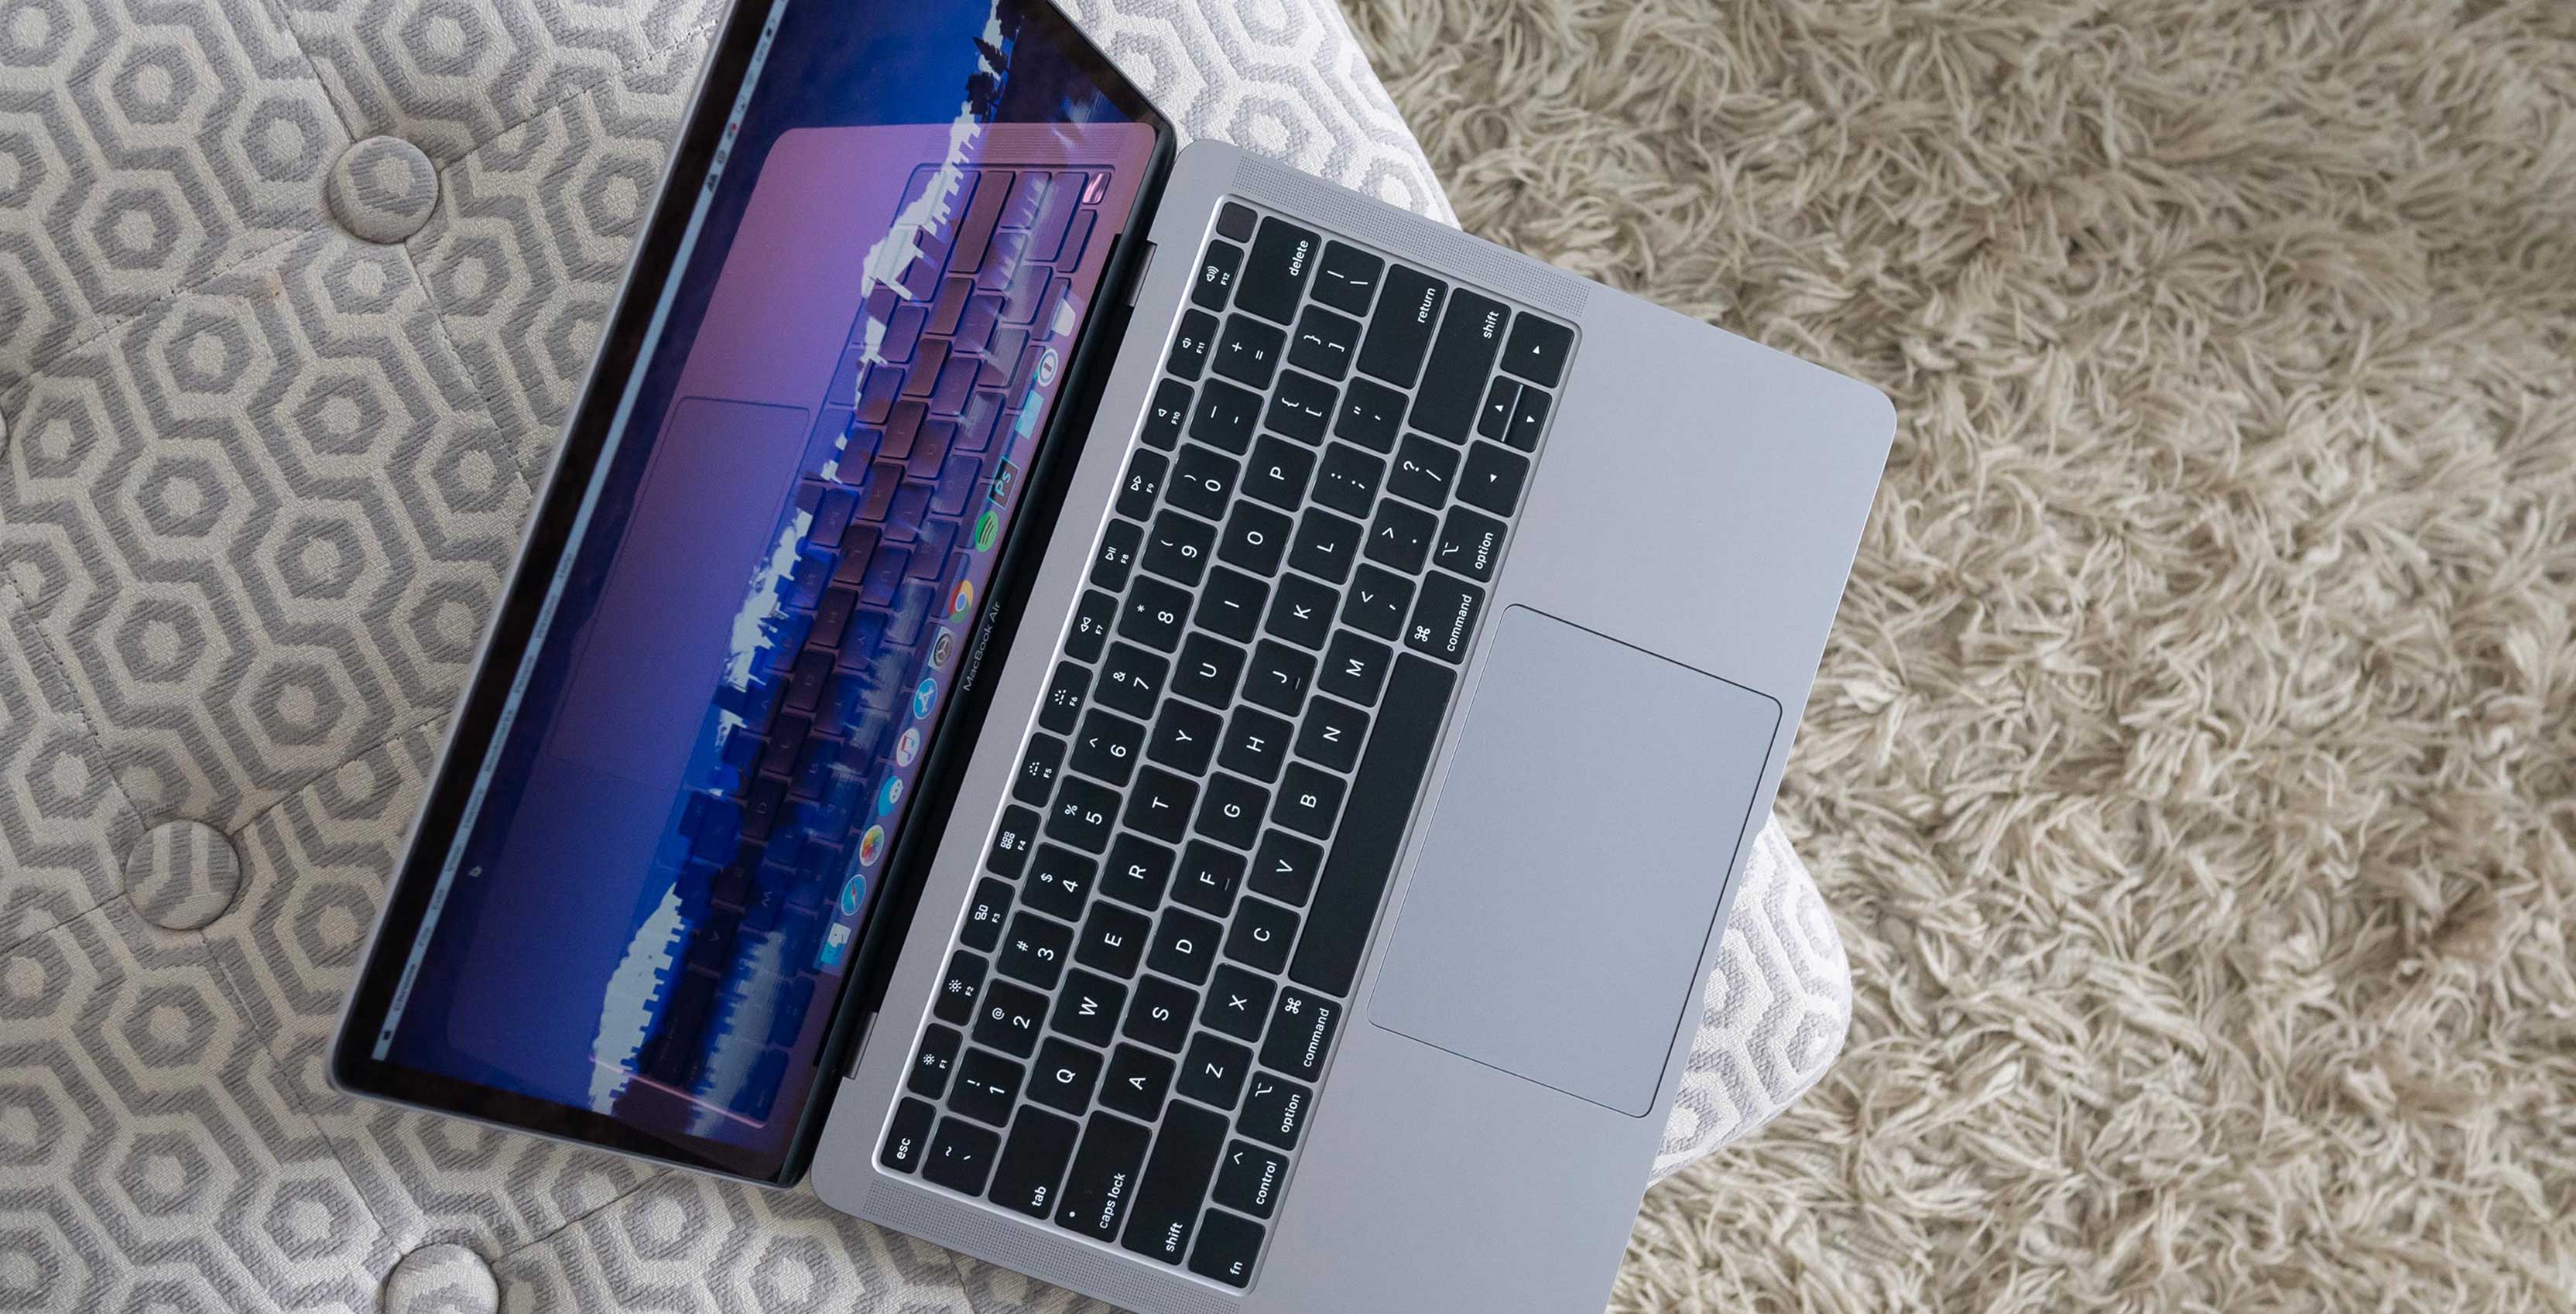 Apple to release 'all-new' 16-inch MacBook Pro and more in 2019: report